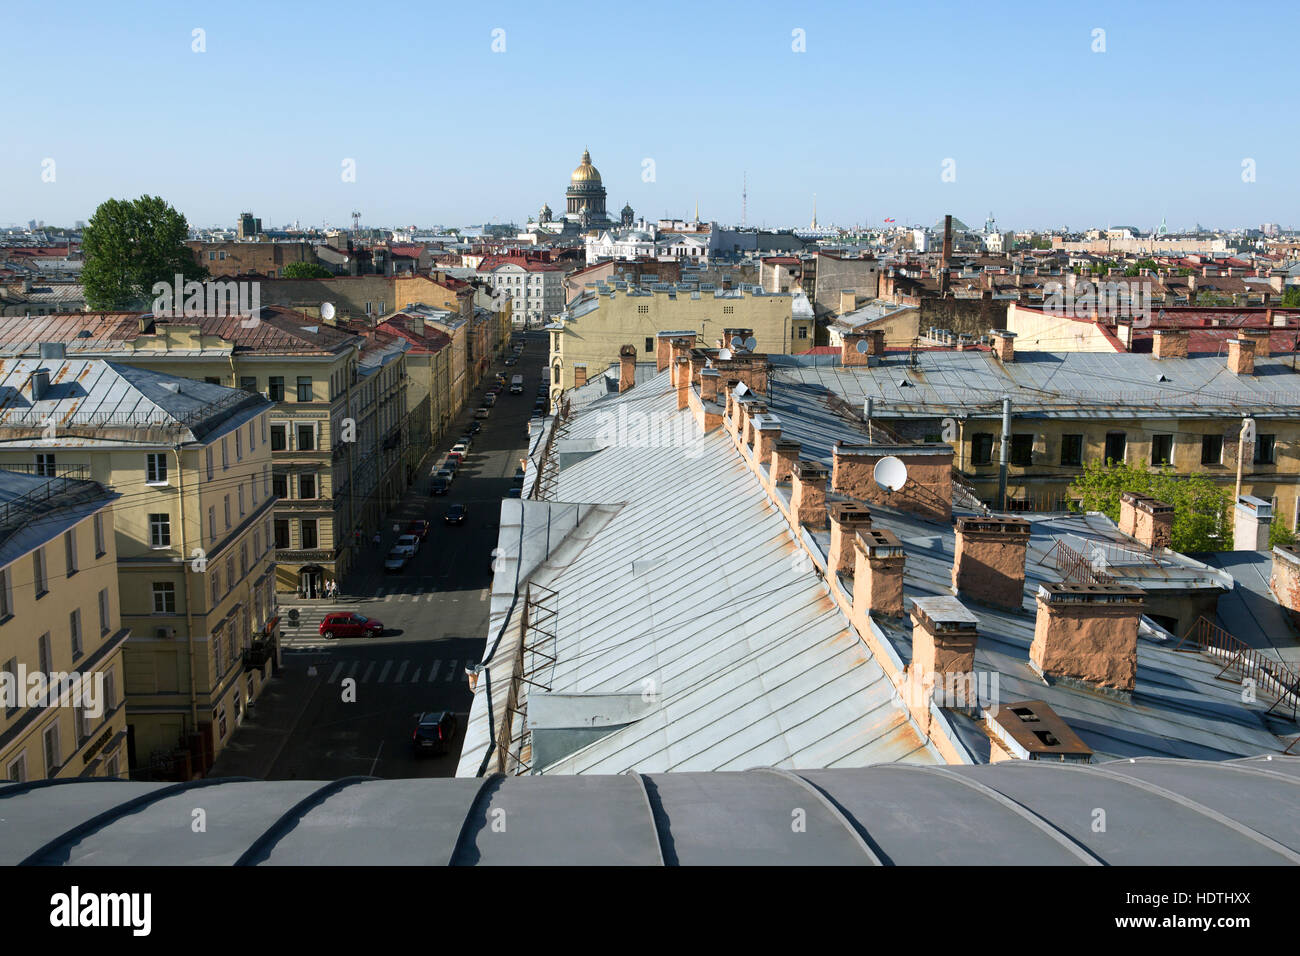 View of houses in the city center in Saint Petersburg Stock Photo